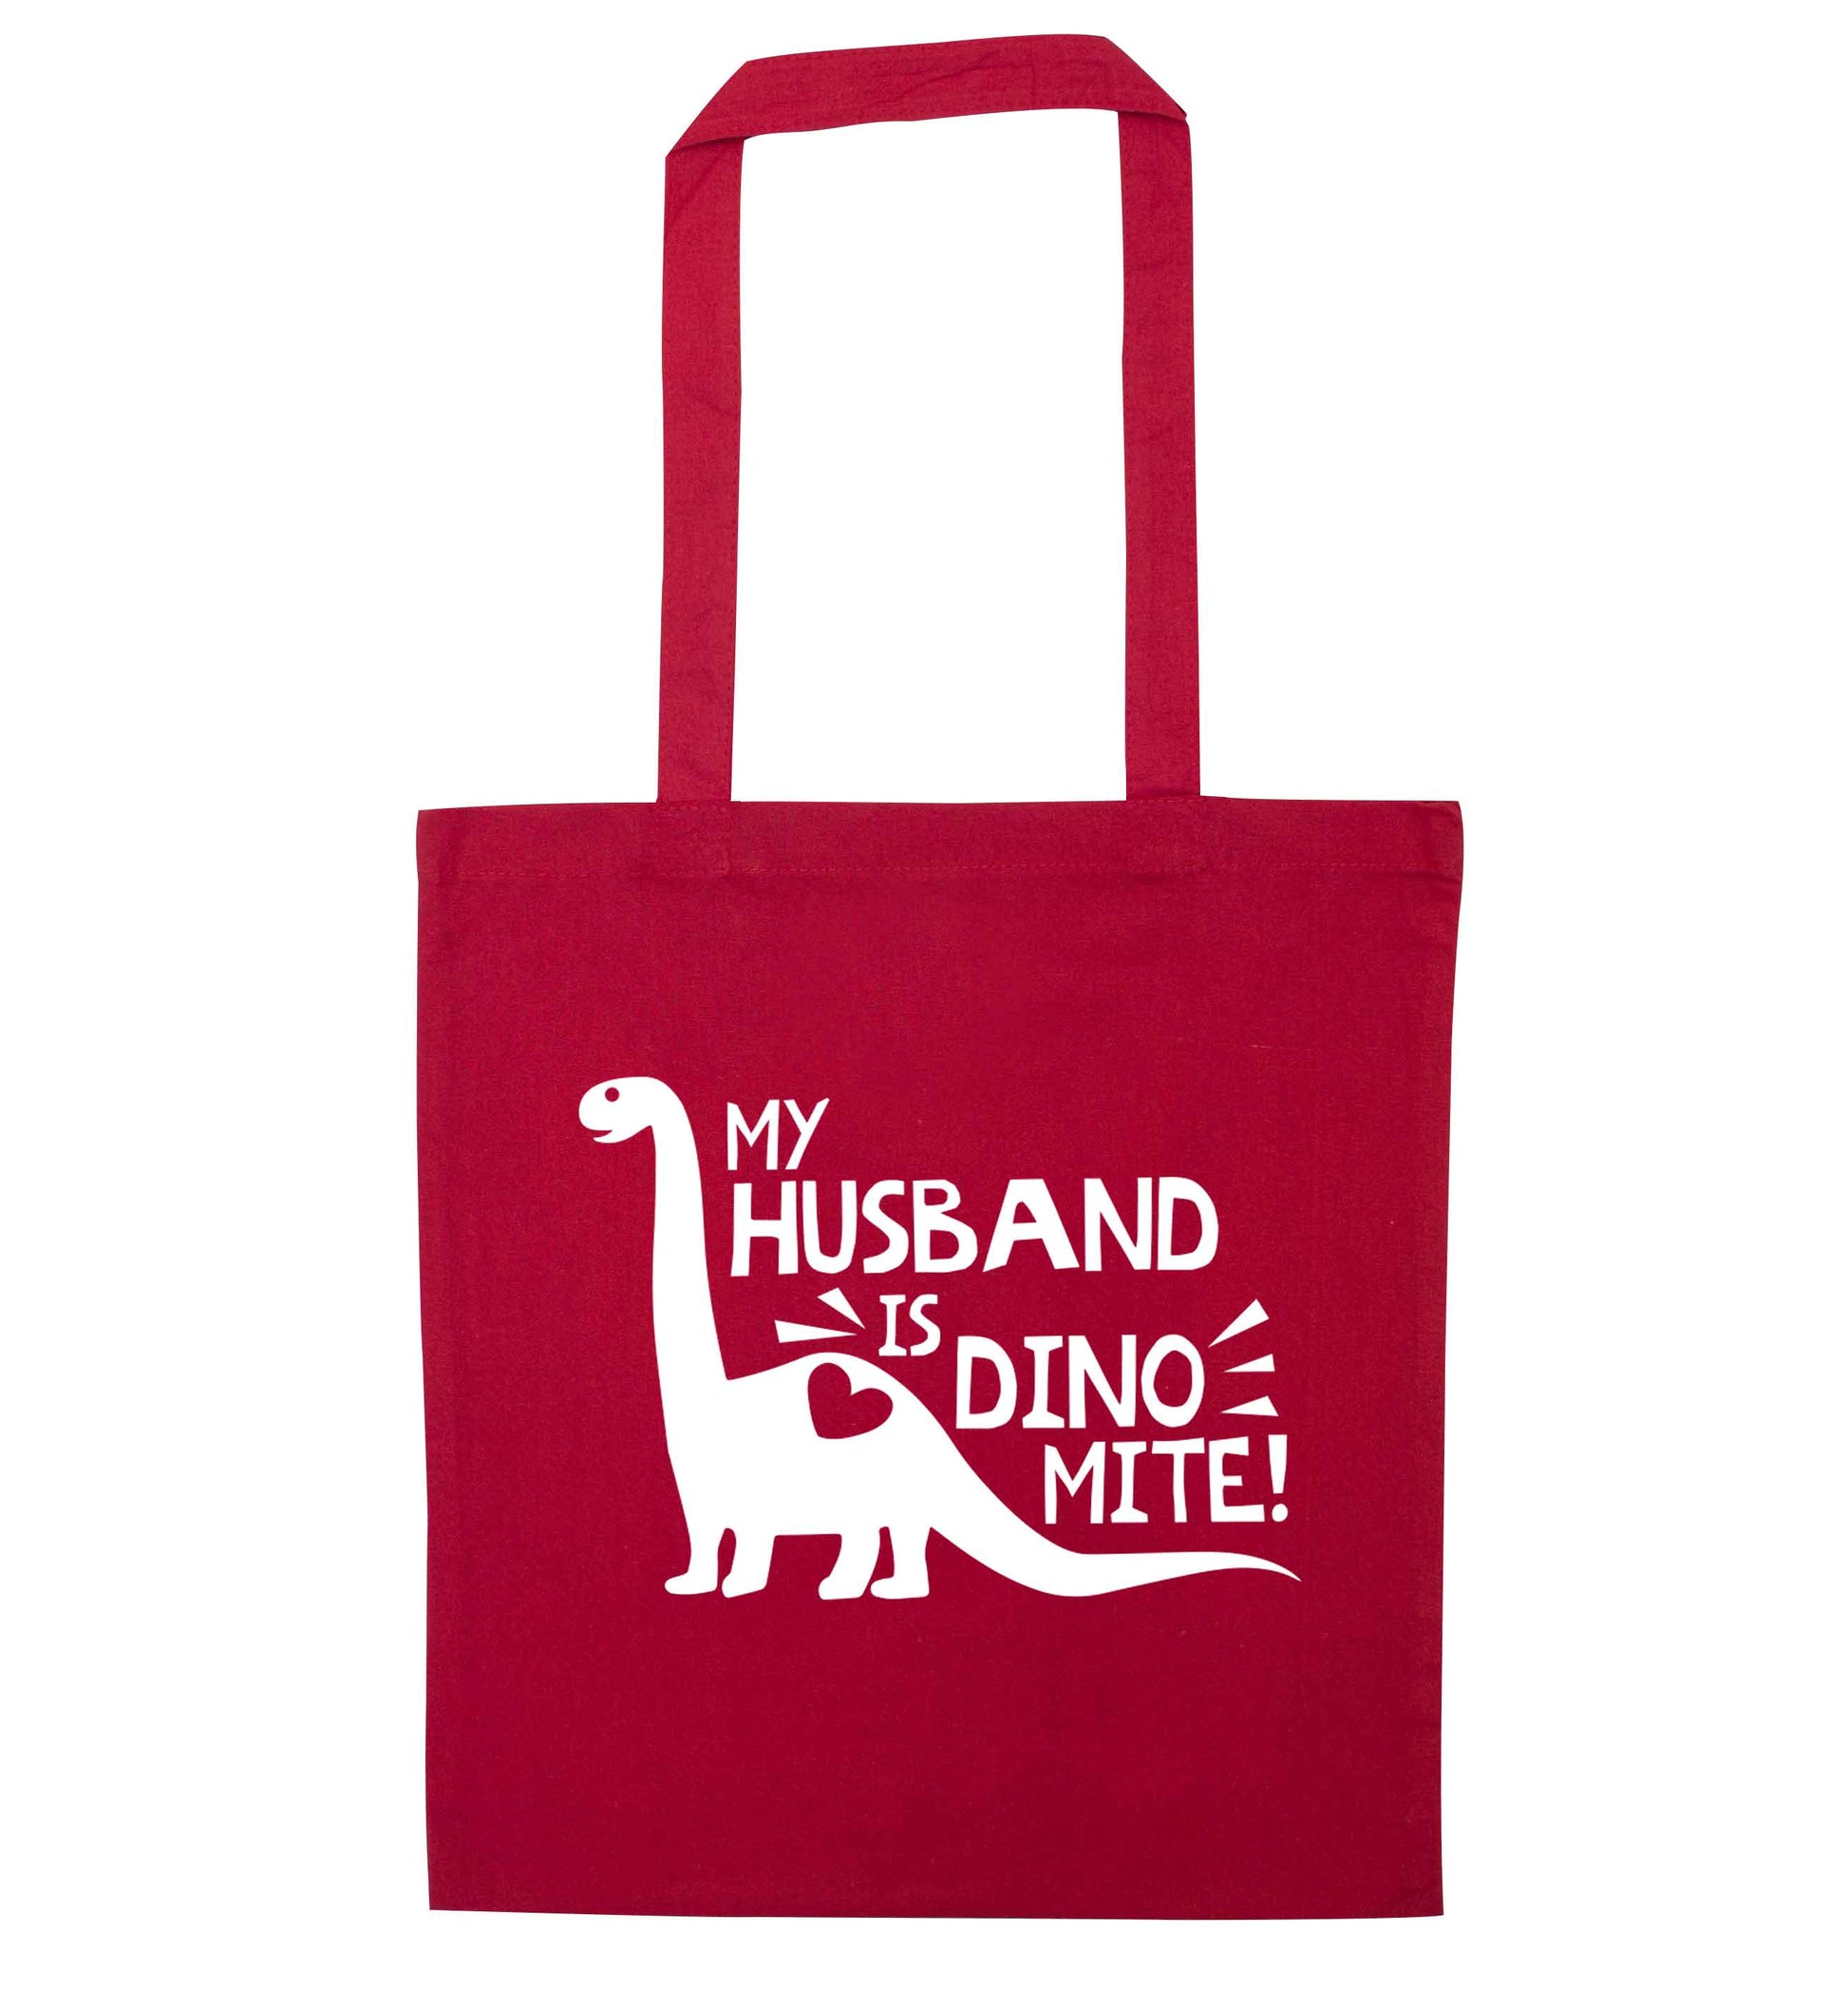 My husband is dinomite! red tote bag